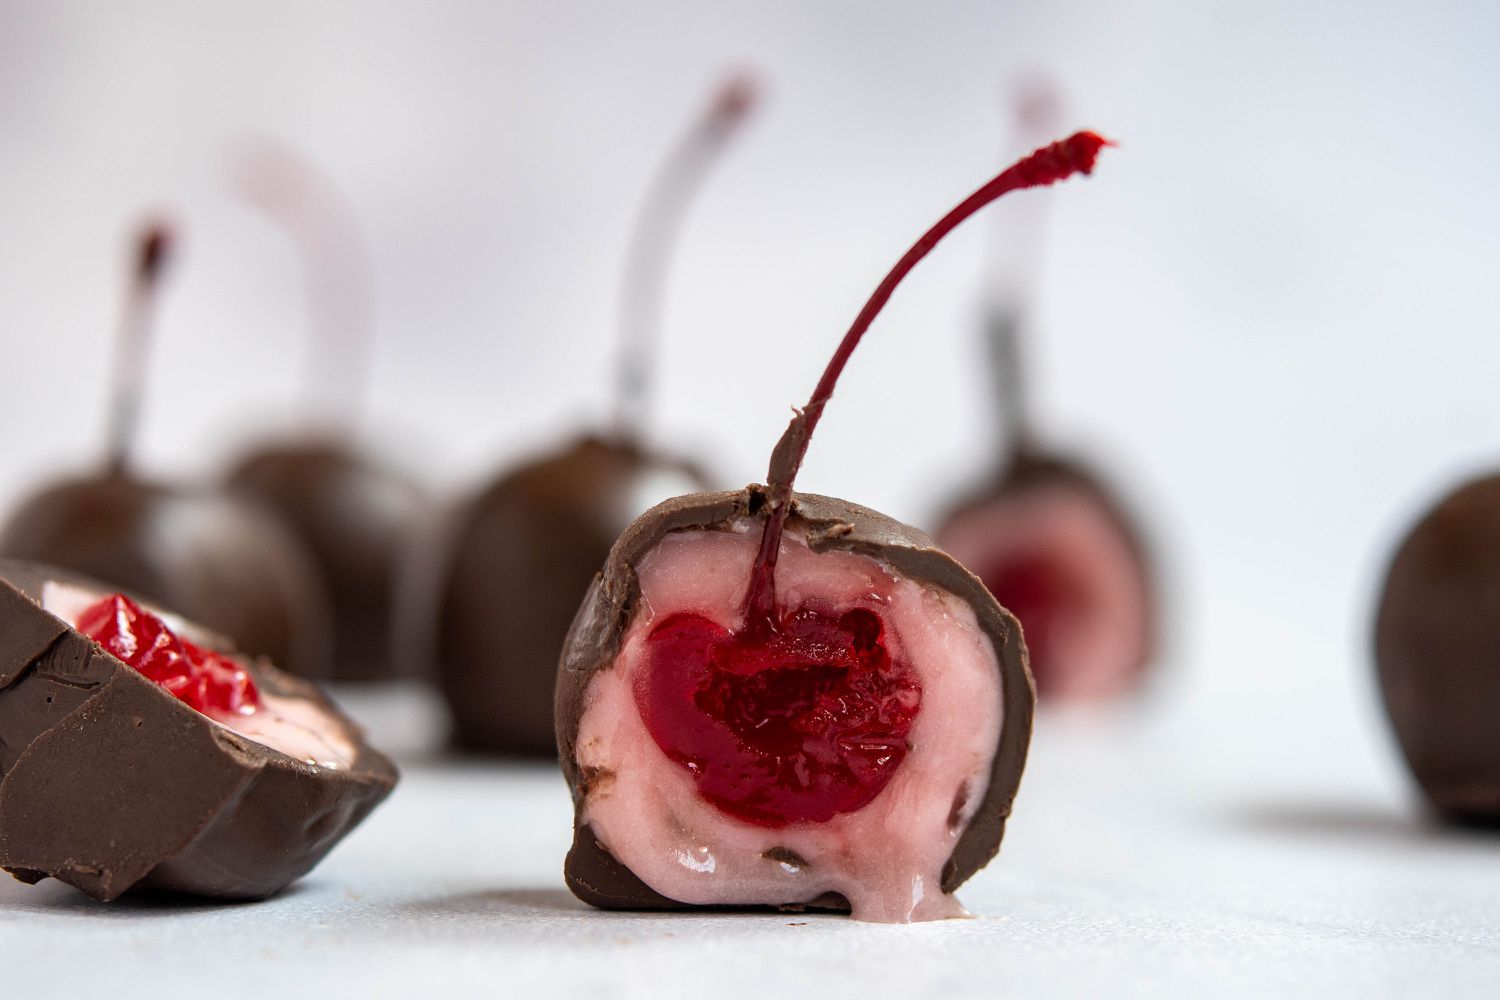 Chocolate Covered Cherries Recipe With Invertase: Step by Step Guide